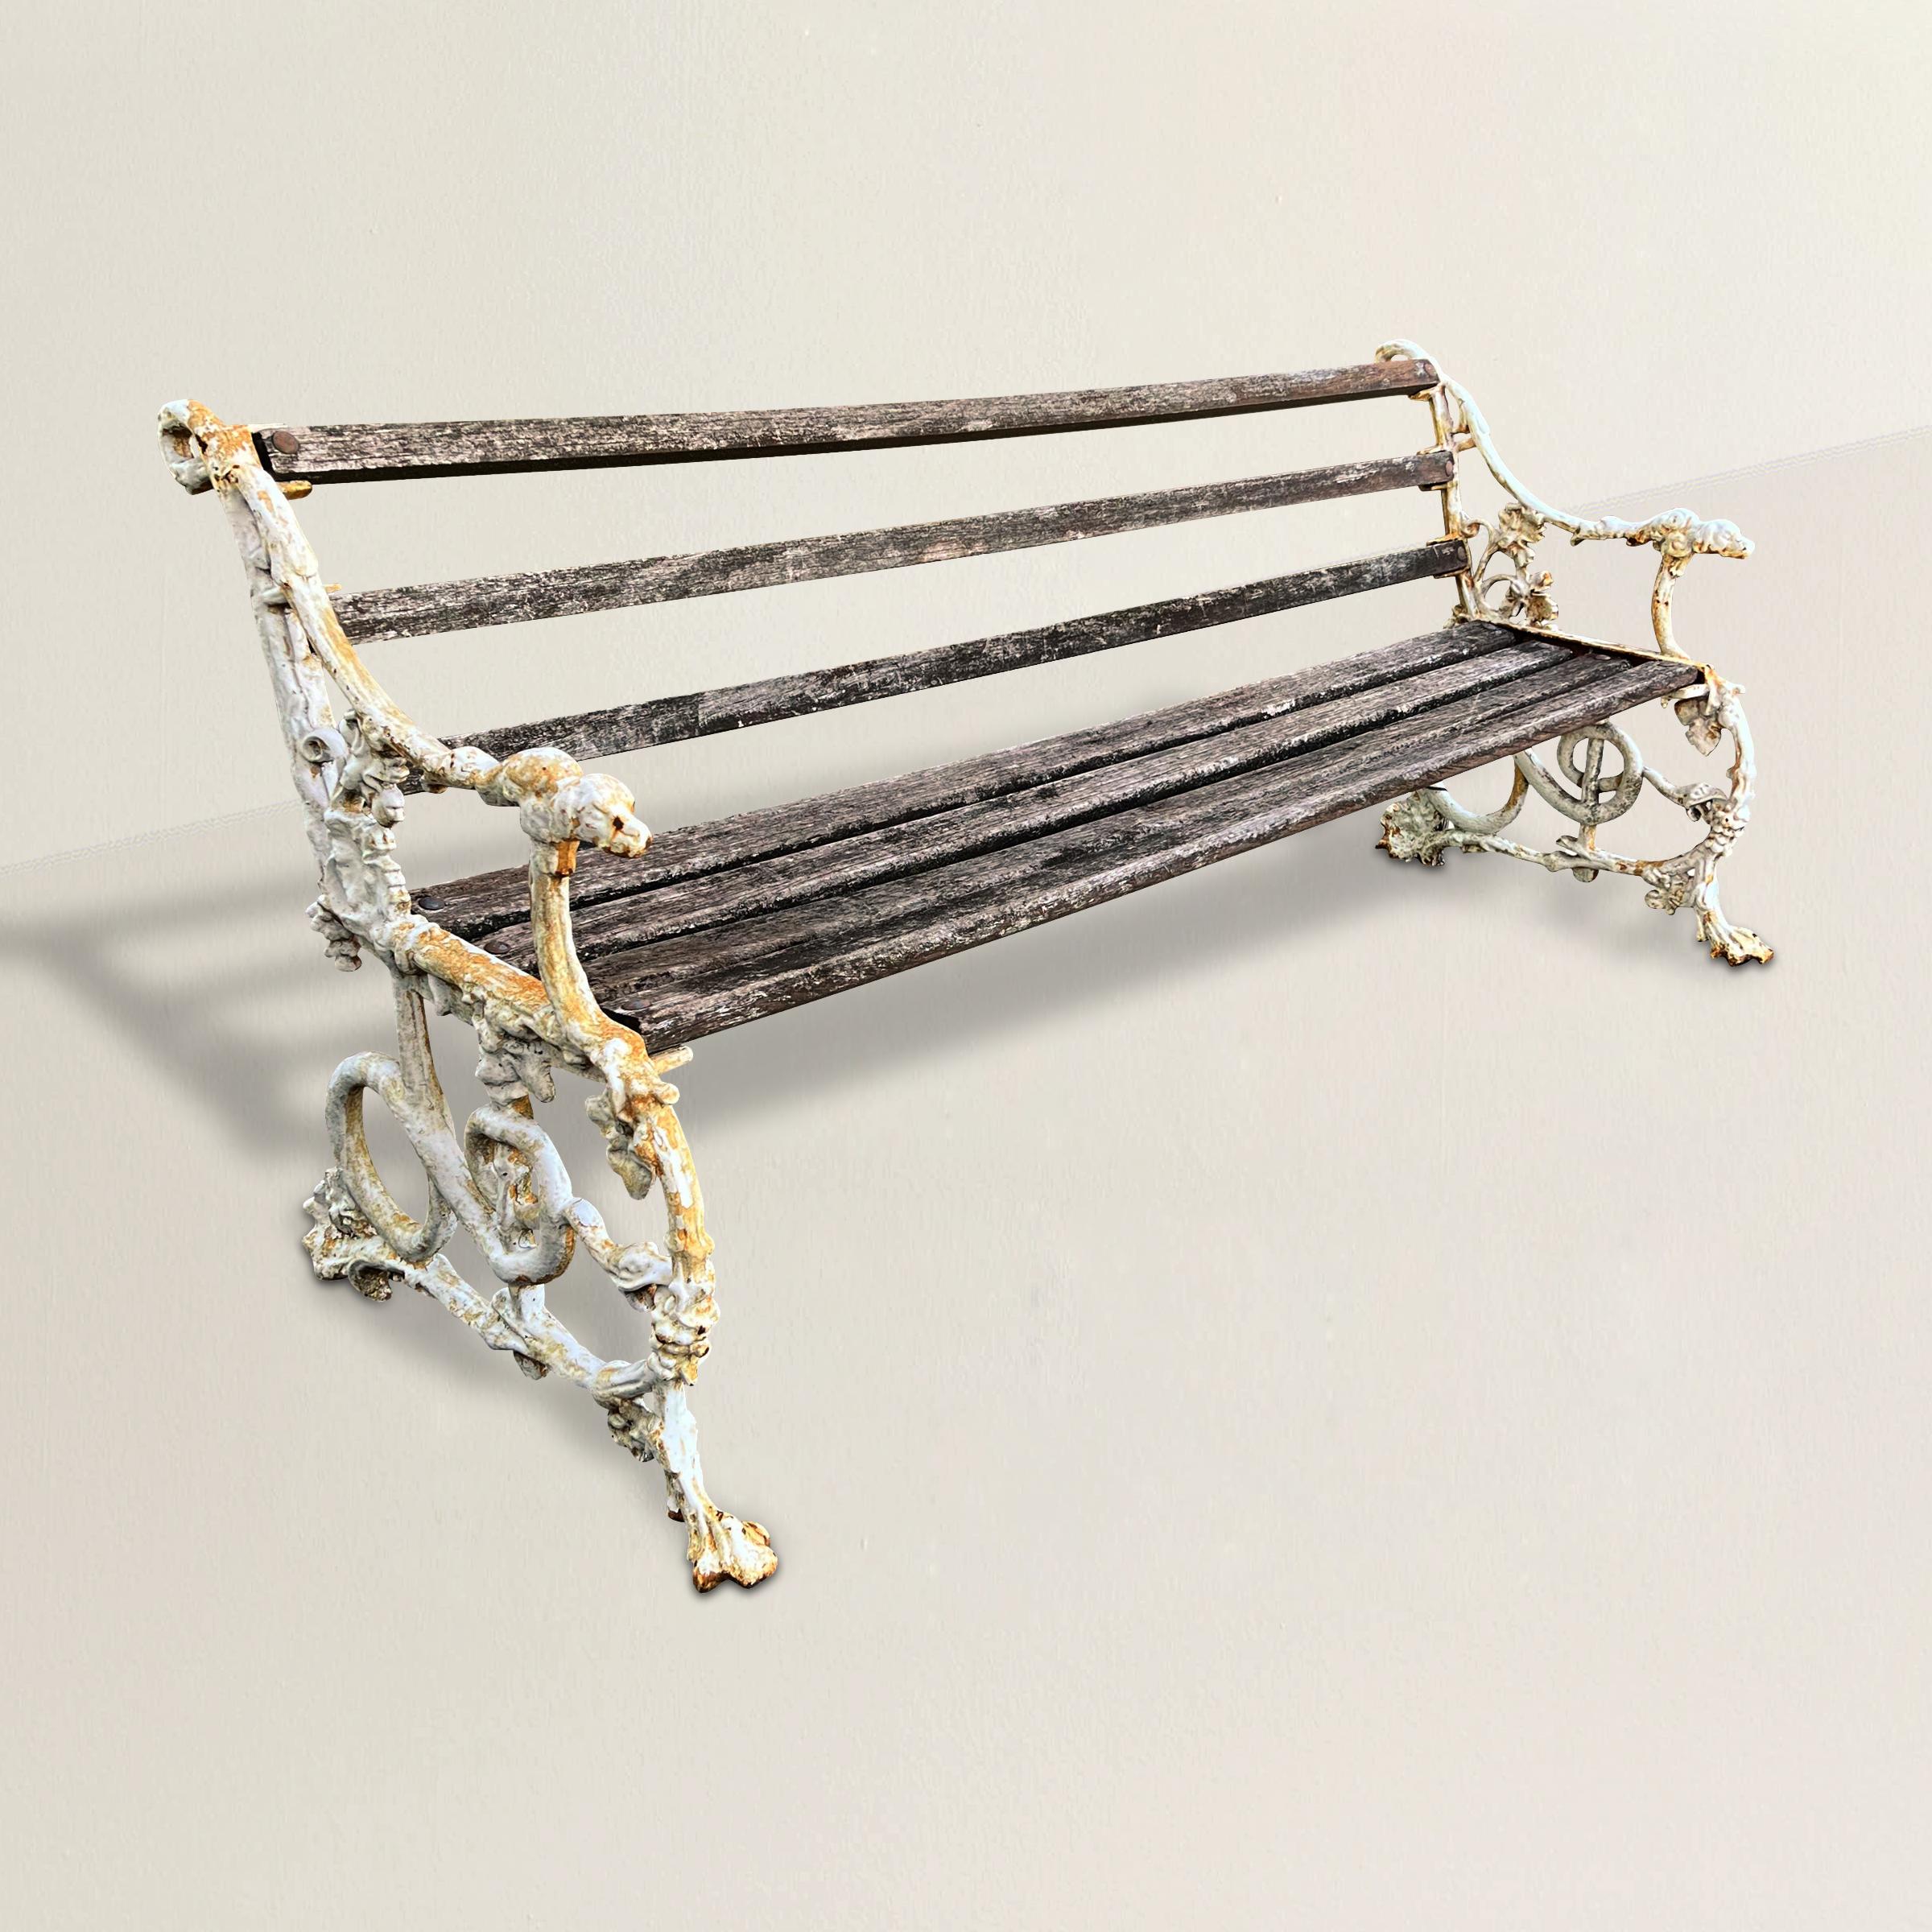 A remarkable classical 19th century English 'Snake and Dog' cast iron garden bench by famed iron forge, Coalbrookdale Iron Company, with dog head arm finials and sides with swirling snakes eating grape clusters. This pattern was an instant classic